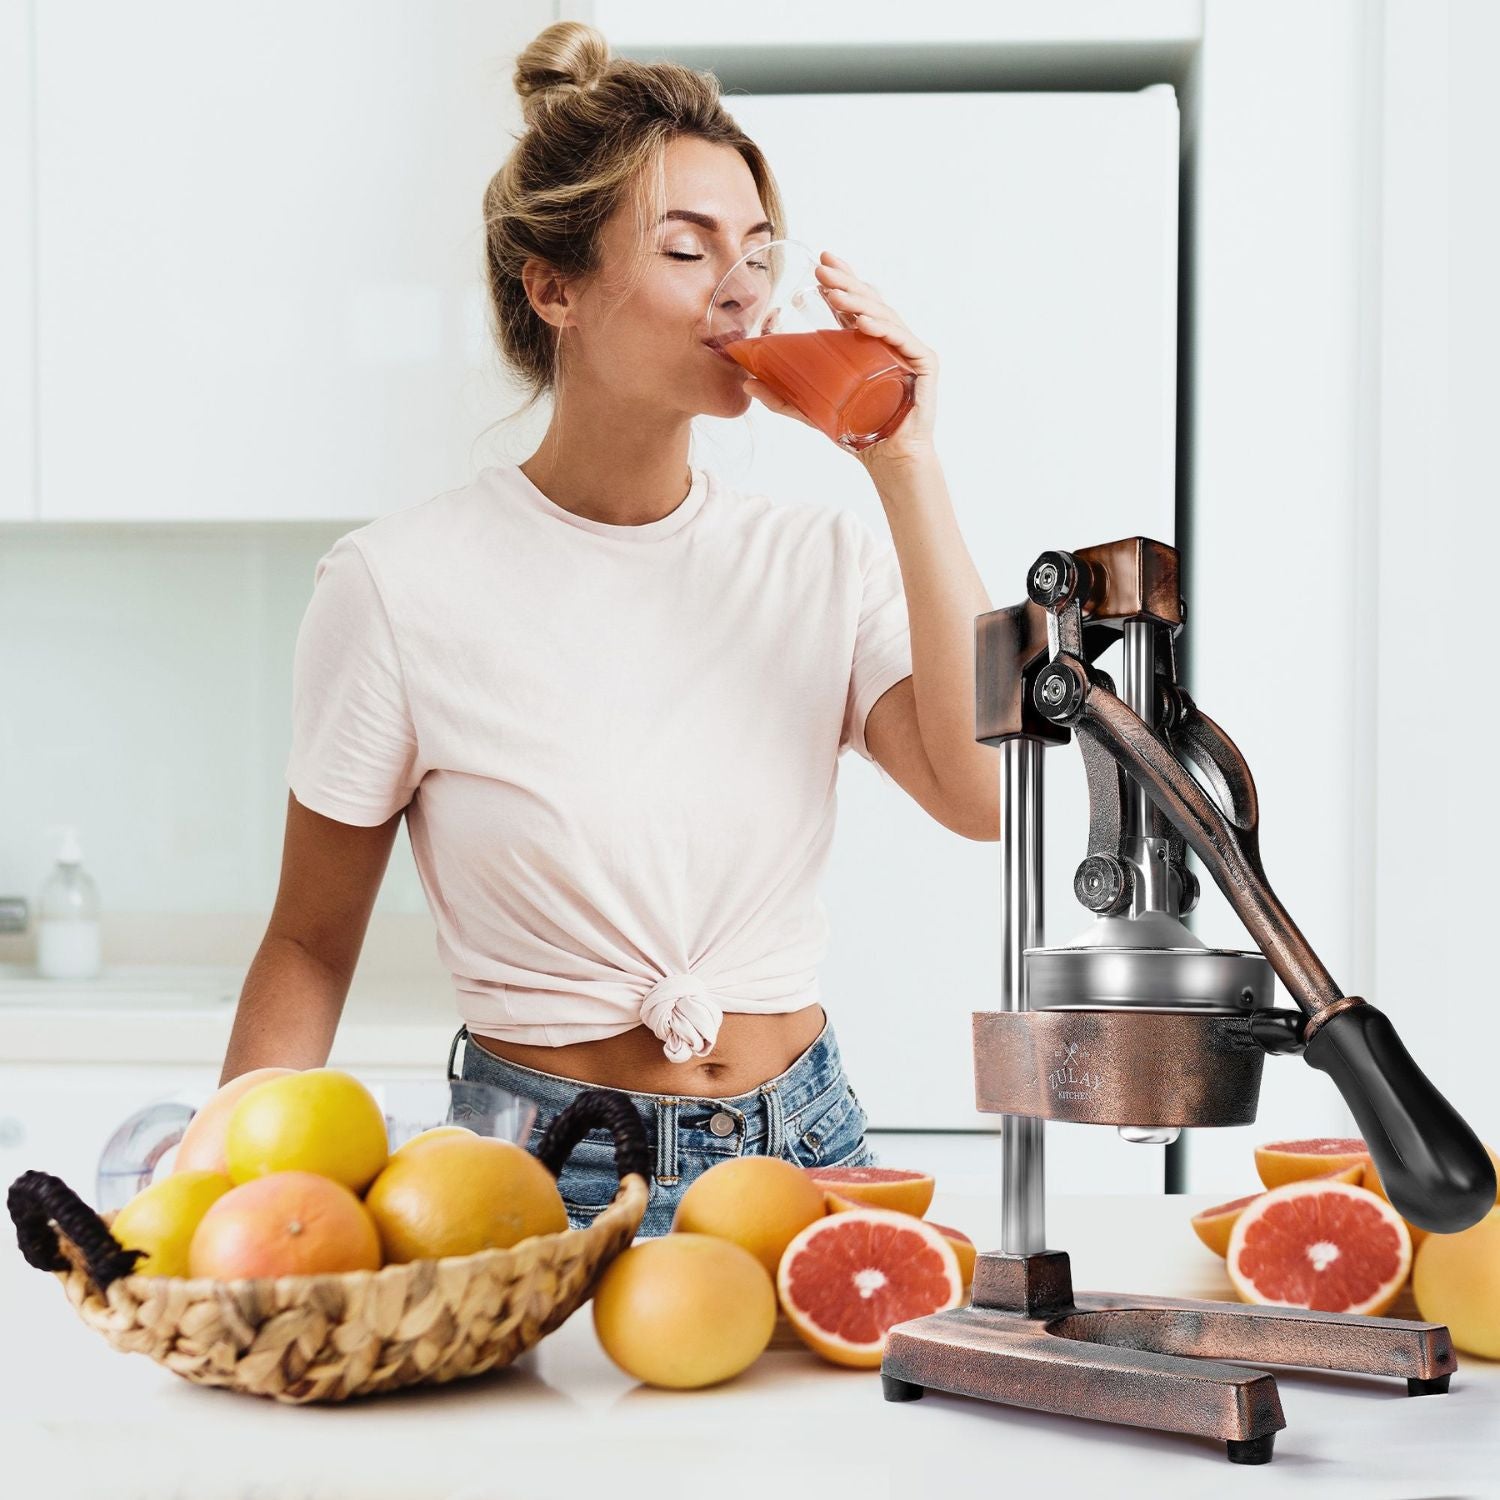 Easy-to-use Handheld Citrus Juicer - One-click Operation For